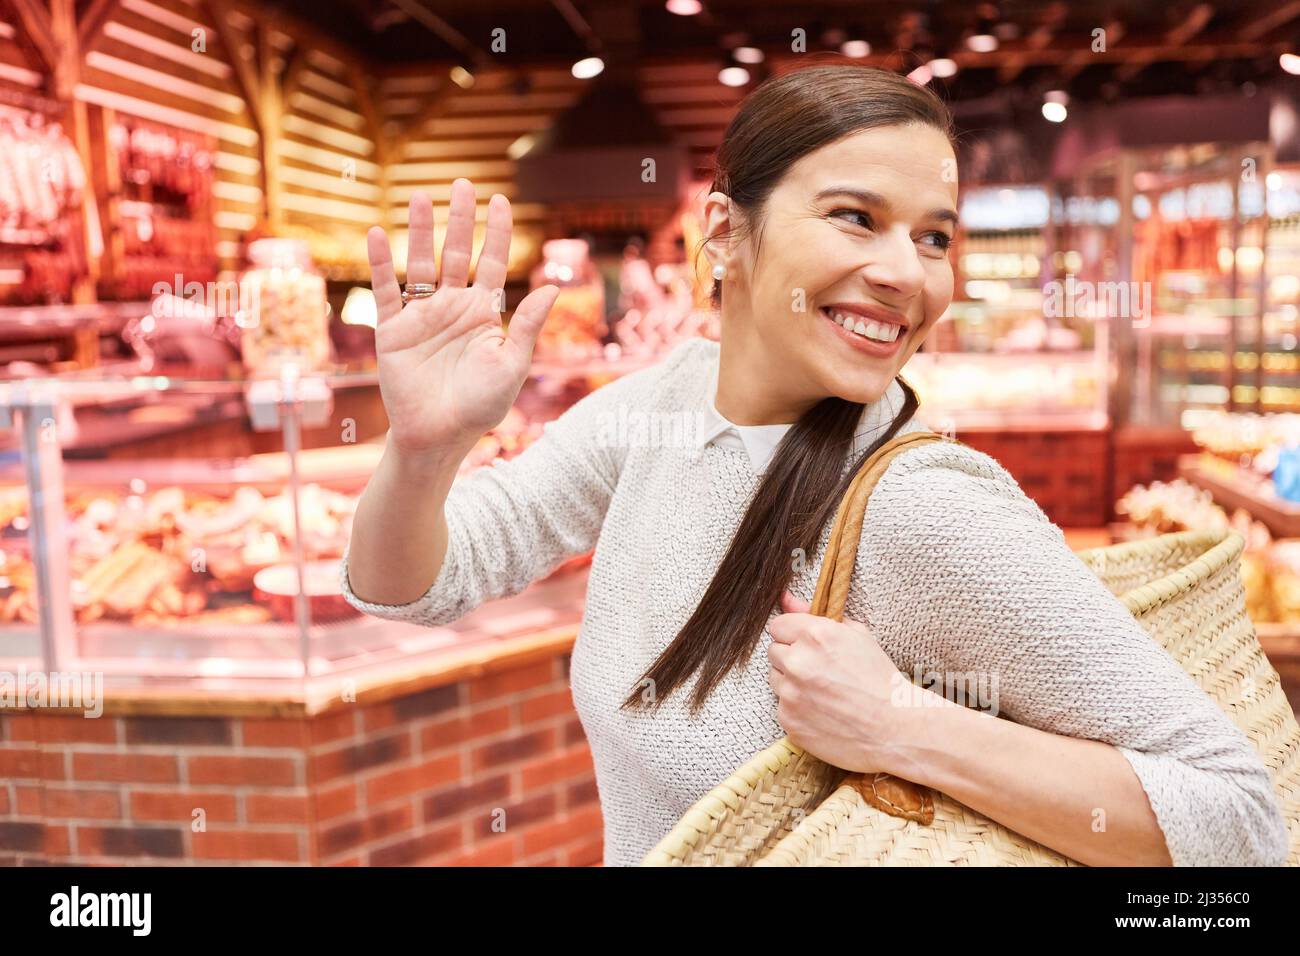 Smiling woman as happy customer with shopping bag in supermarket waving Stock Photo